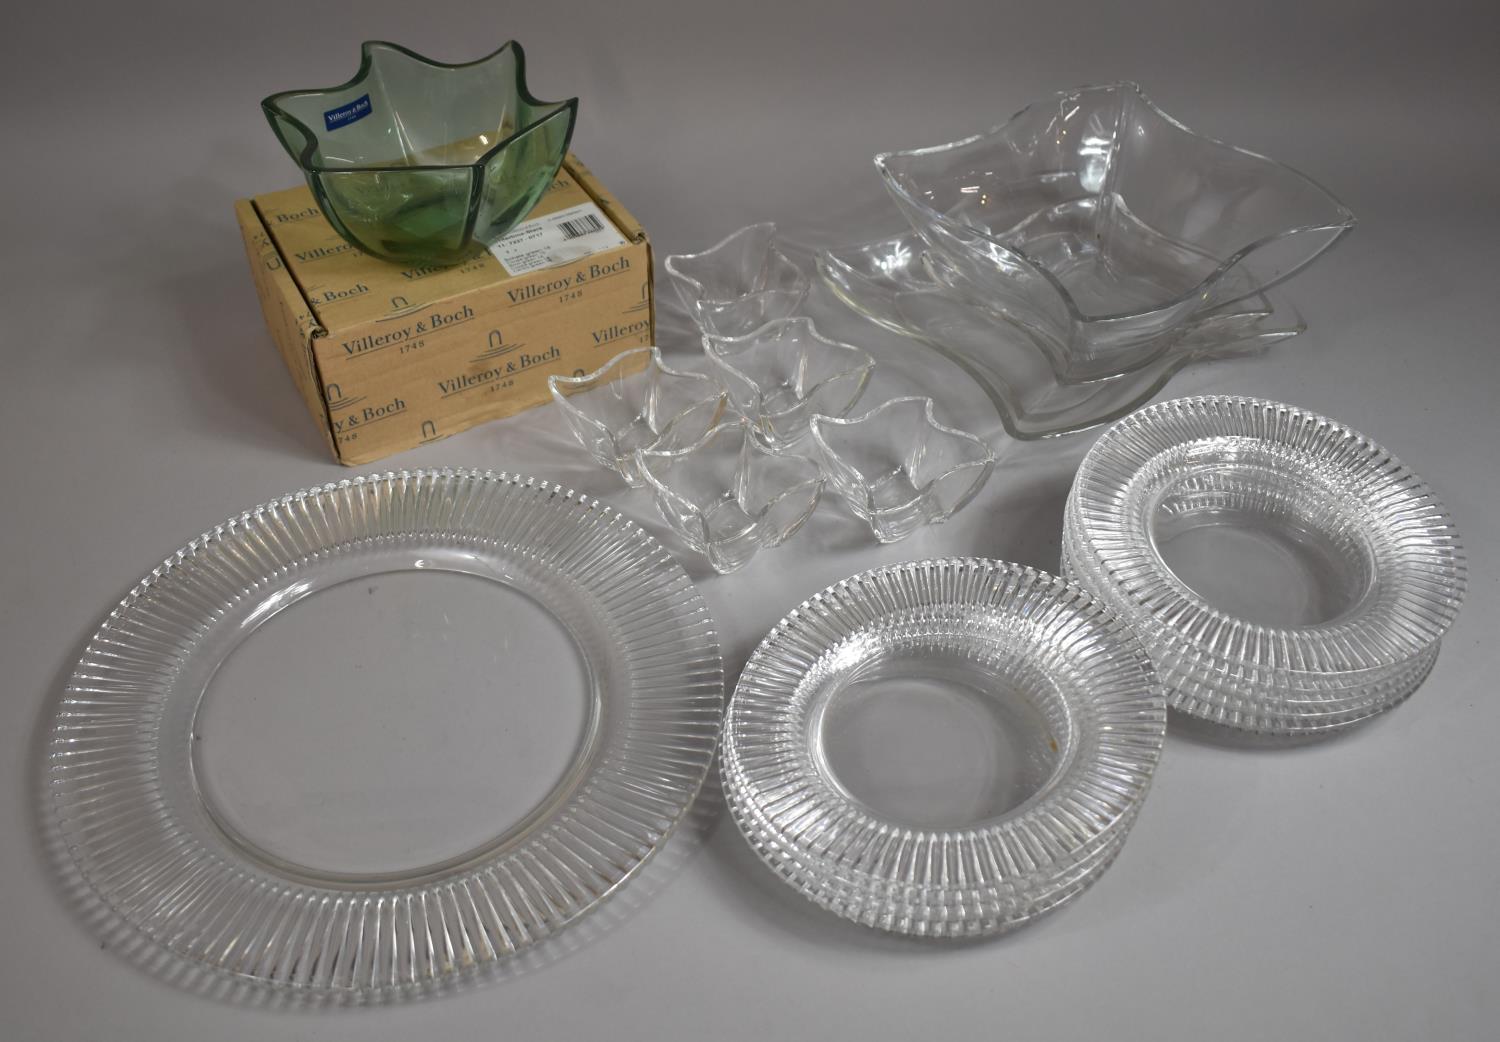 A Collection of Villeroy & Boch Glass Bowls to Include Boxed Wintertime Shaped Example Together with